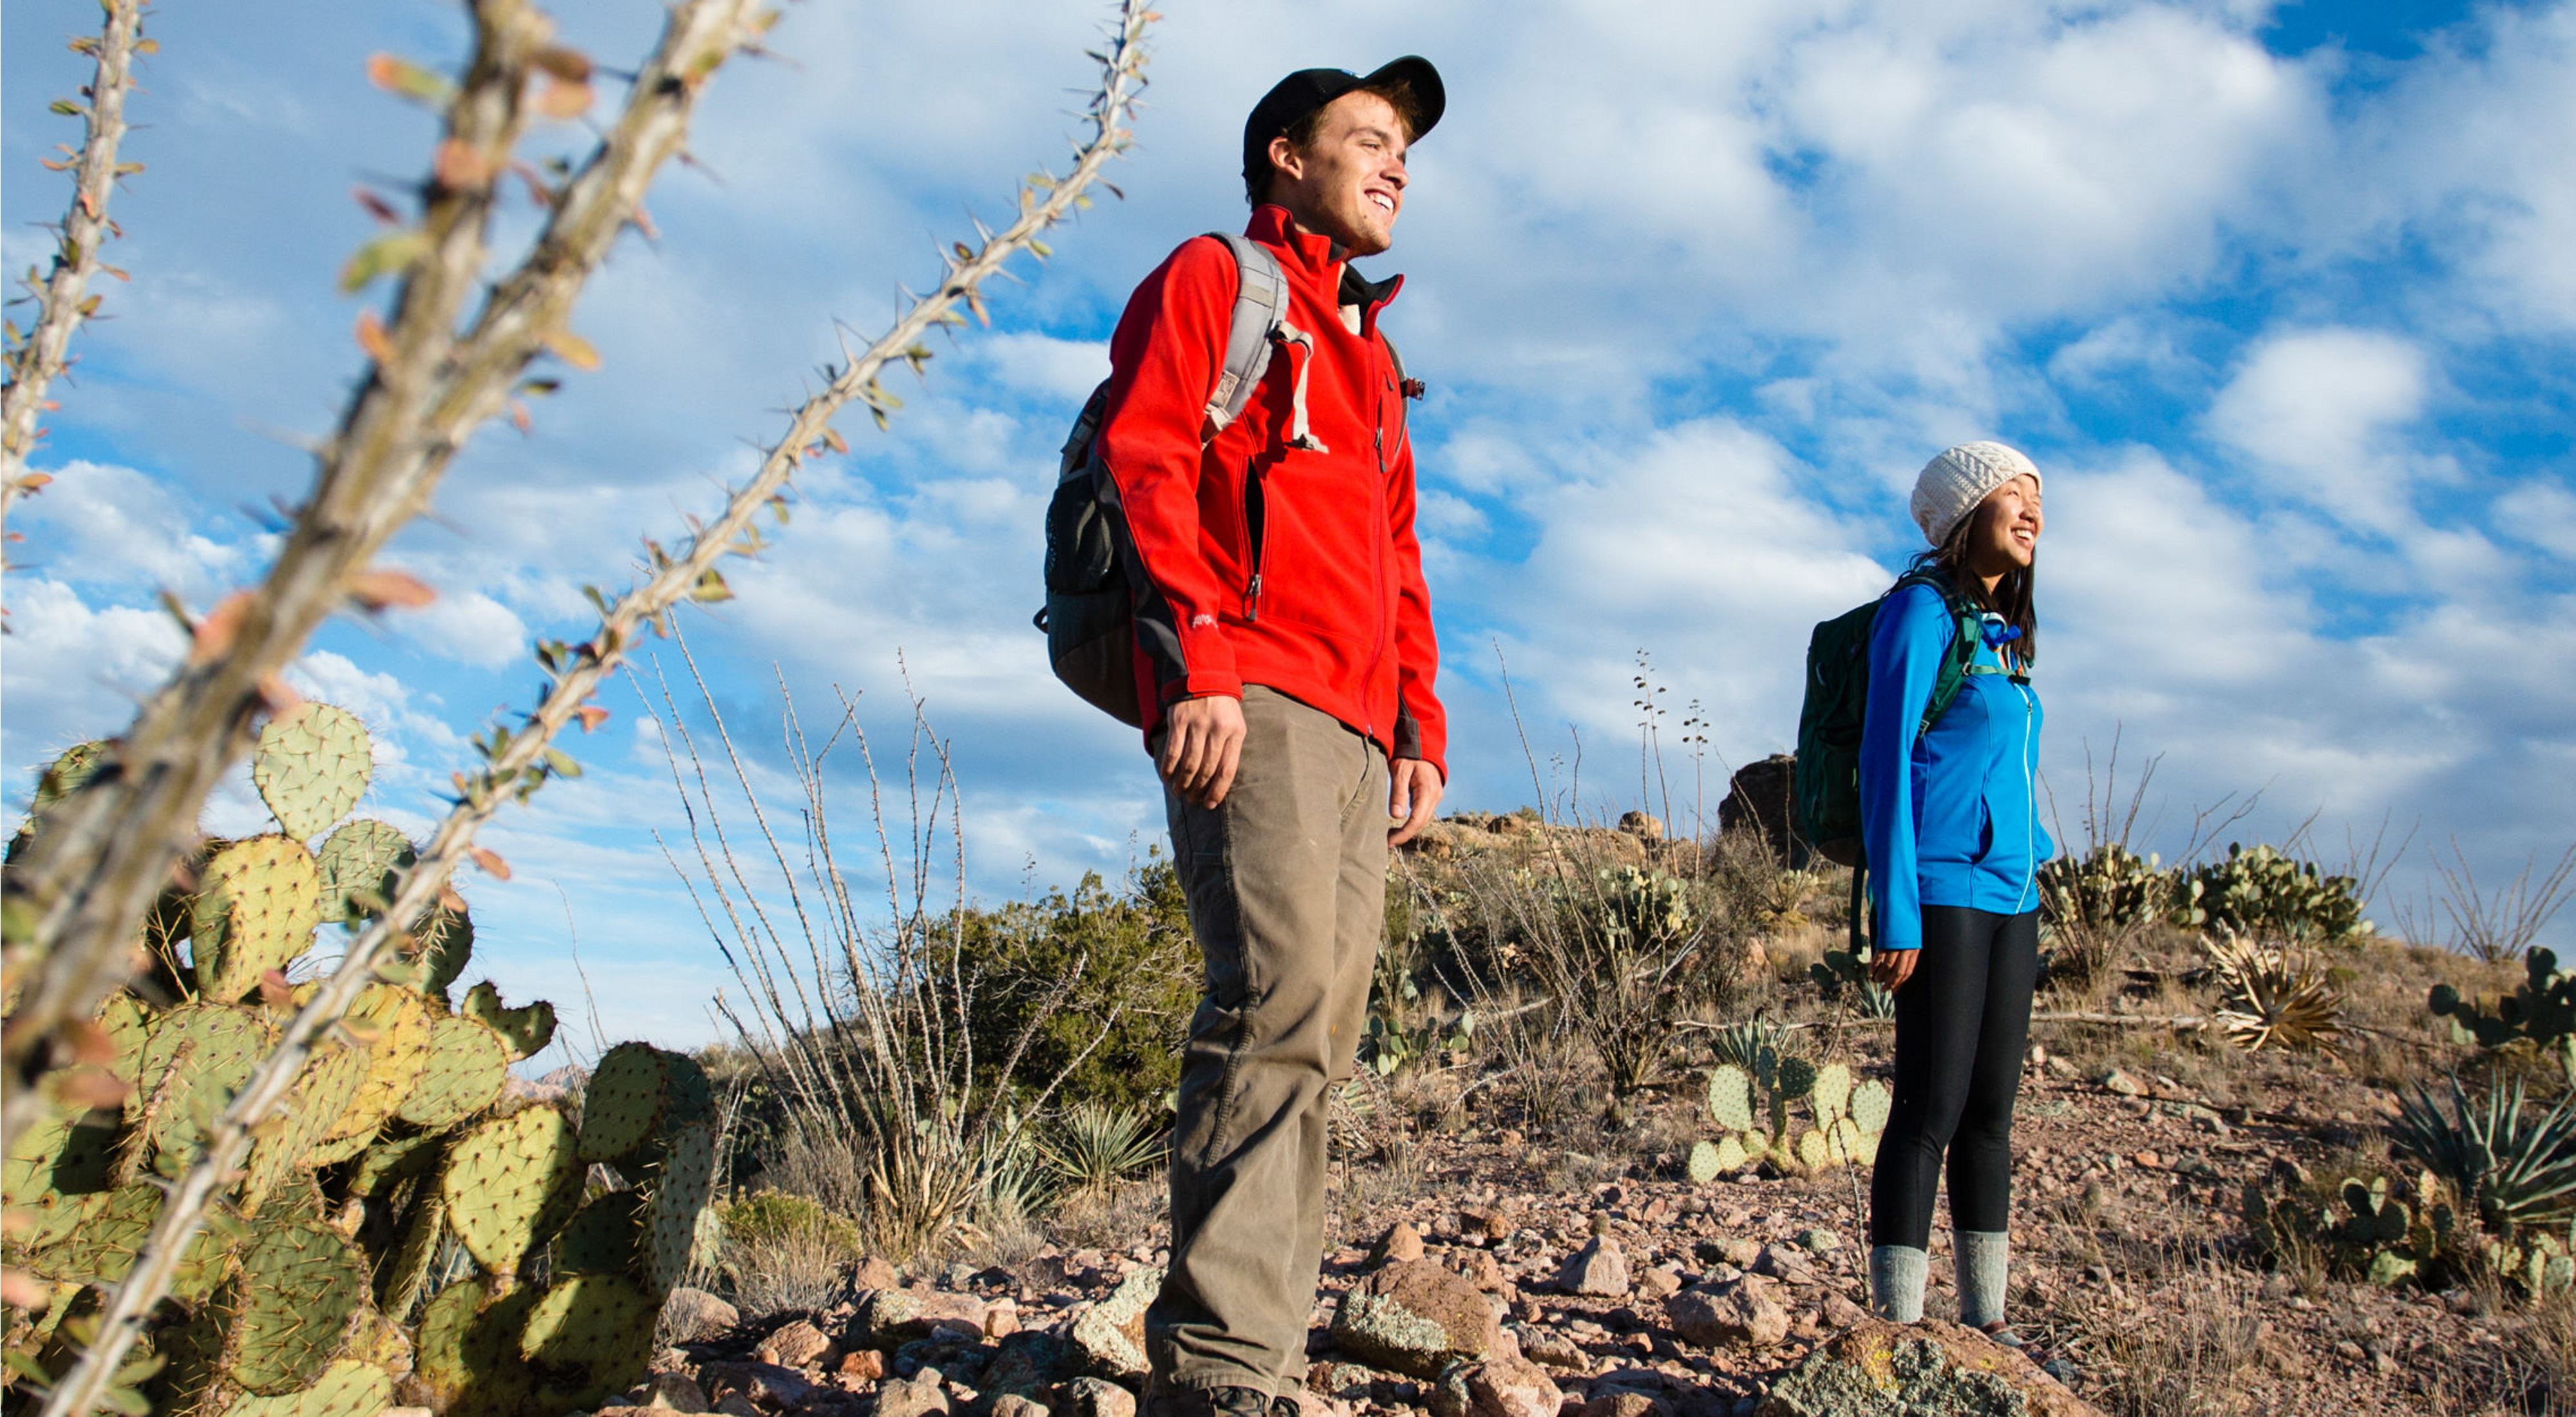 Two hikers stand near cactus in a desert preserve.